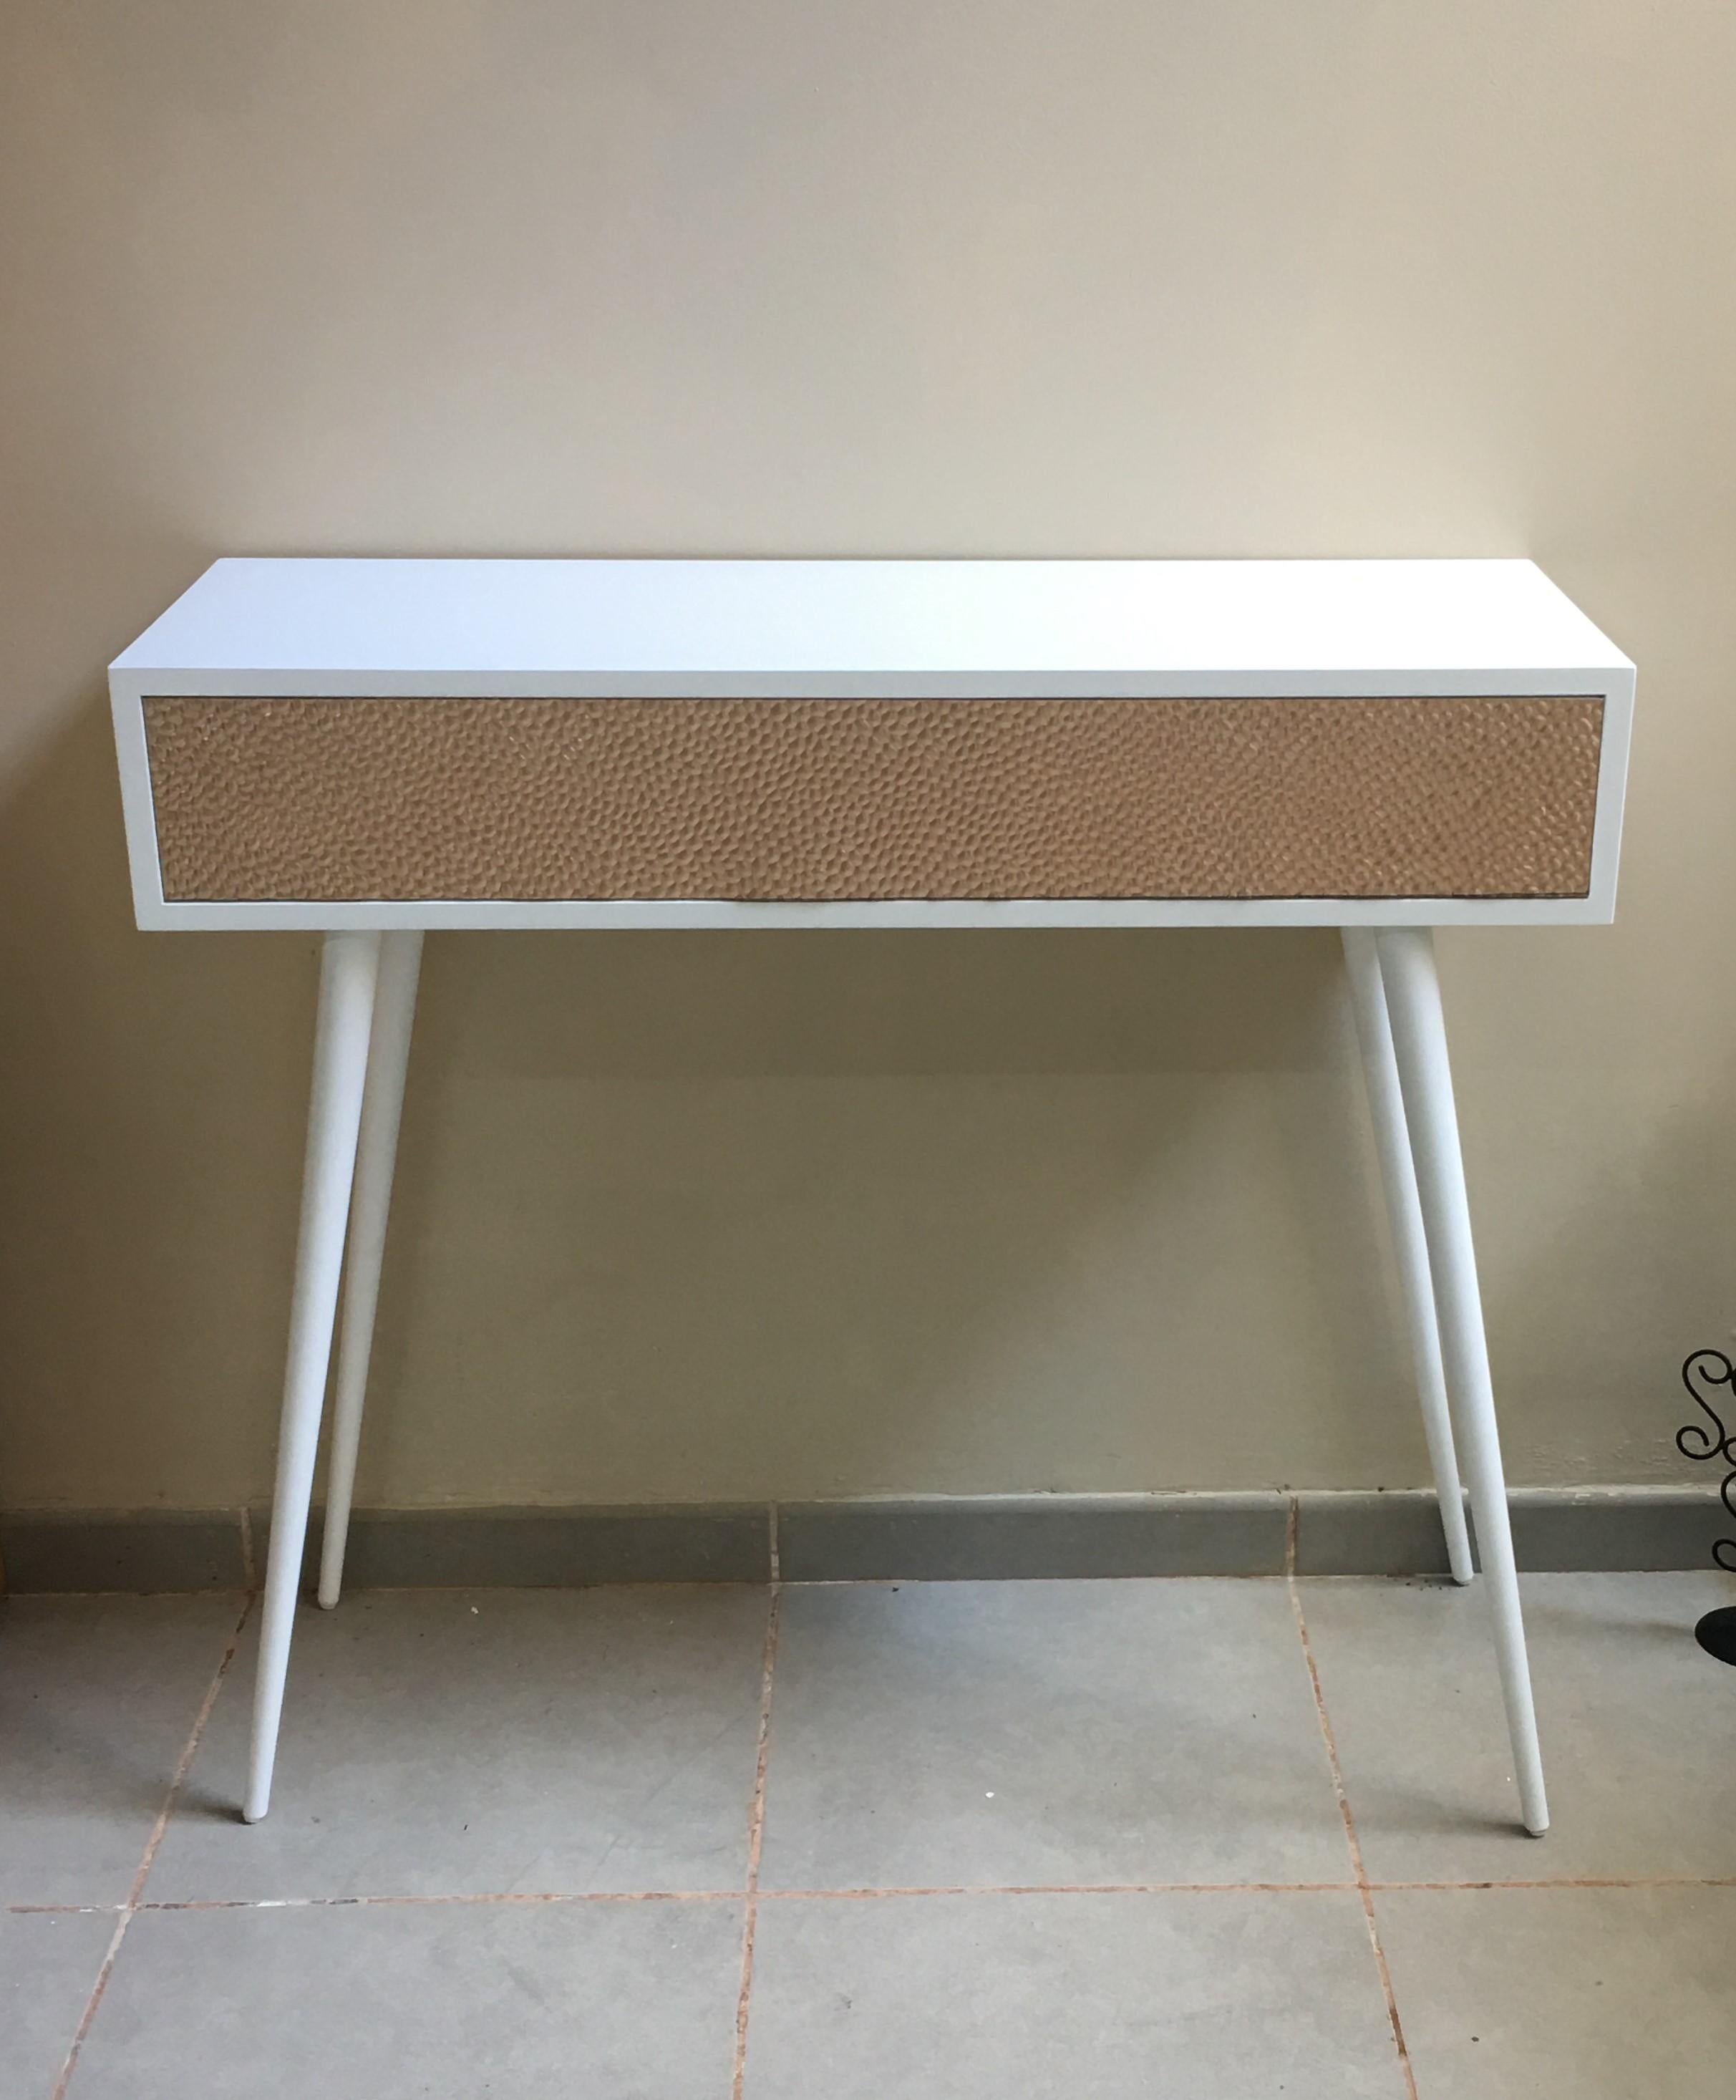 New pink relief metal and white Lacquered wood console table with drawer. Handmade

Unique piece, prototype of a Spanish designer.